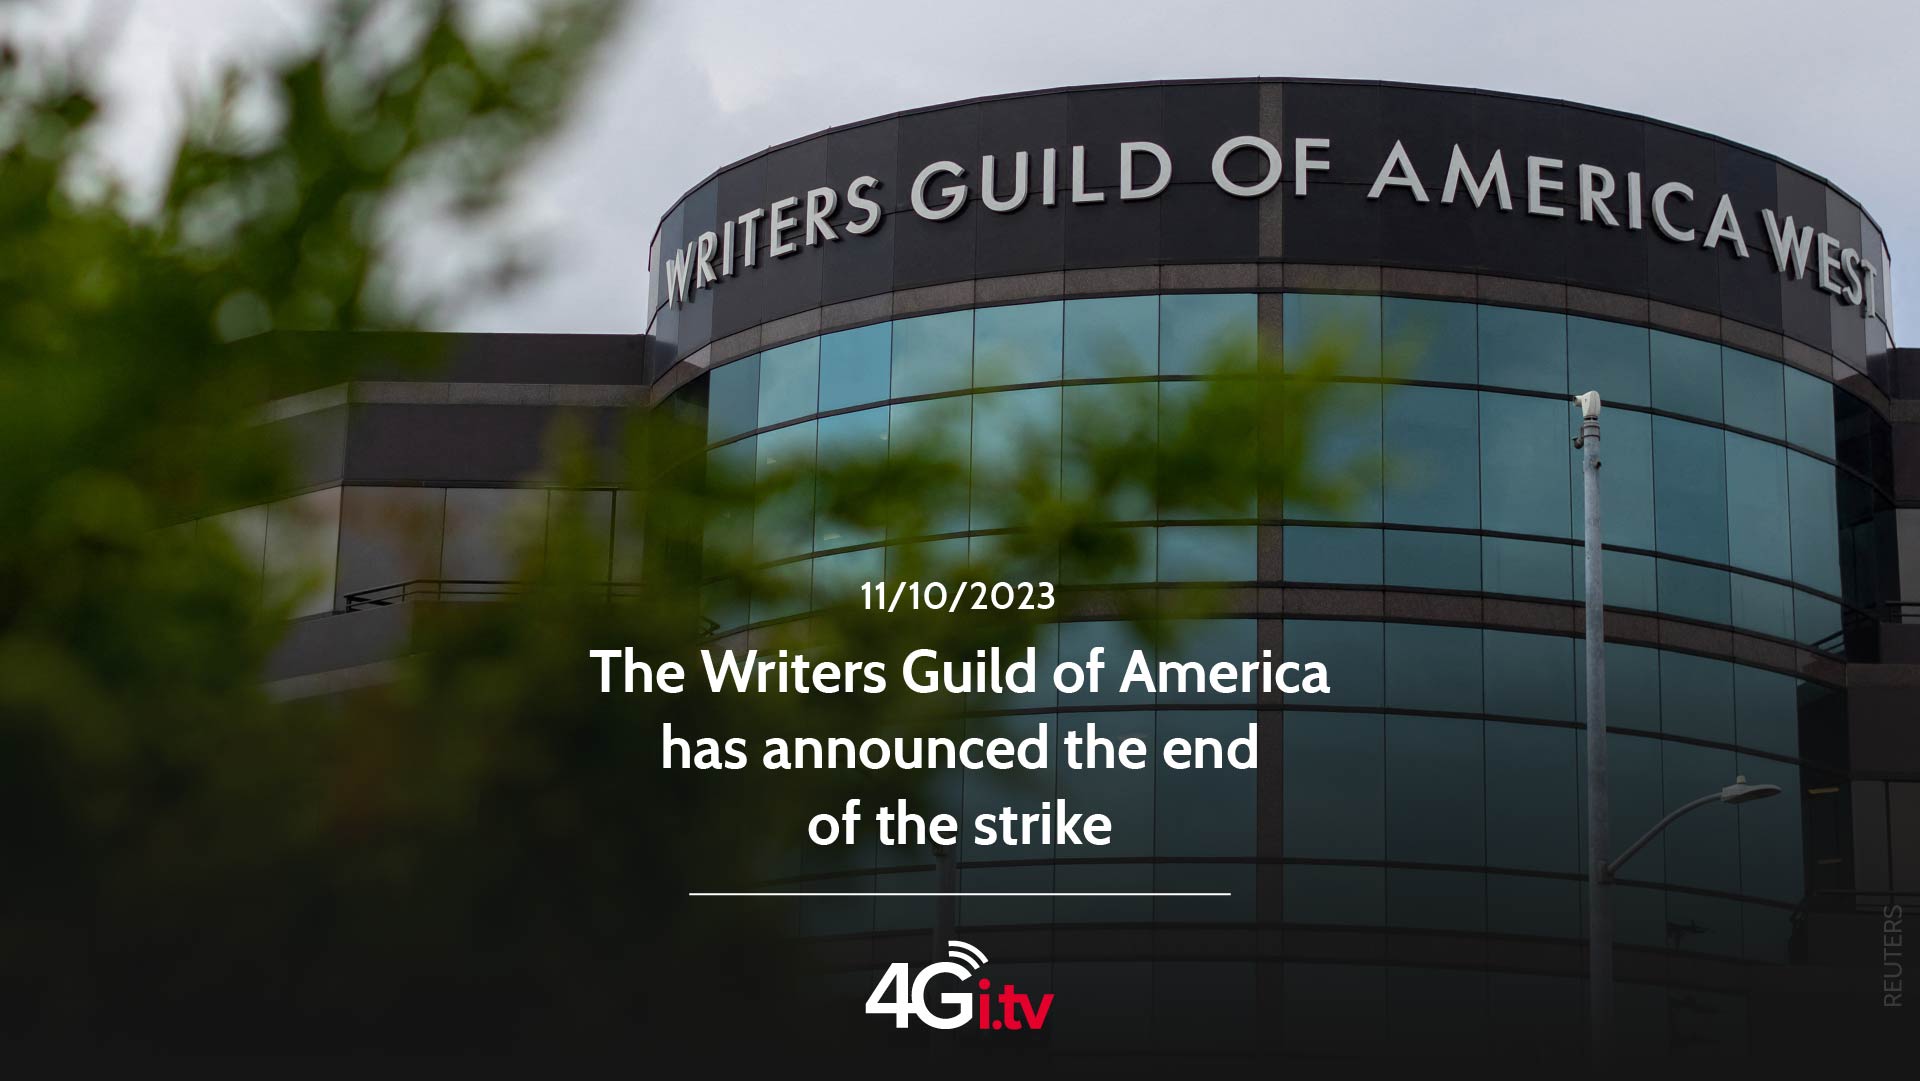 Lesen Sie mehr über den Artikel The Writers Guild of America has announced the end of the strike